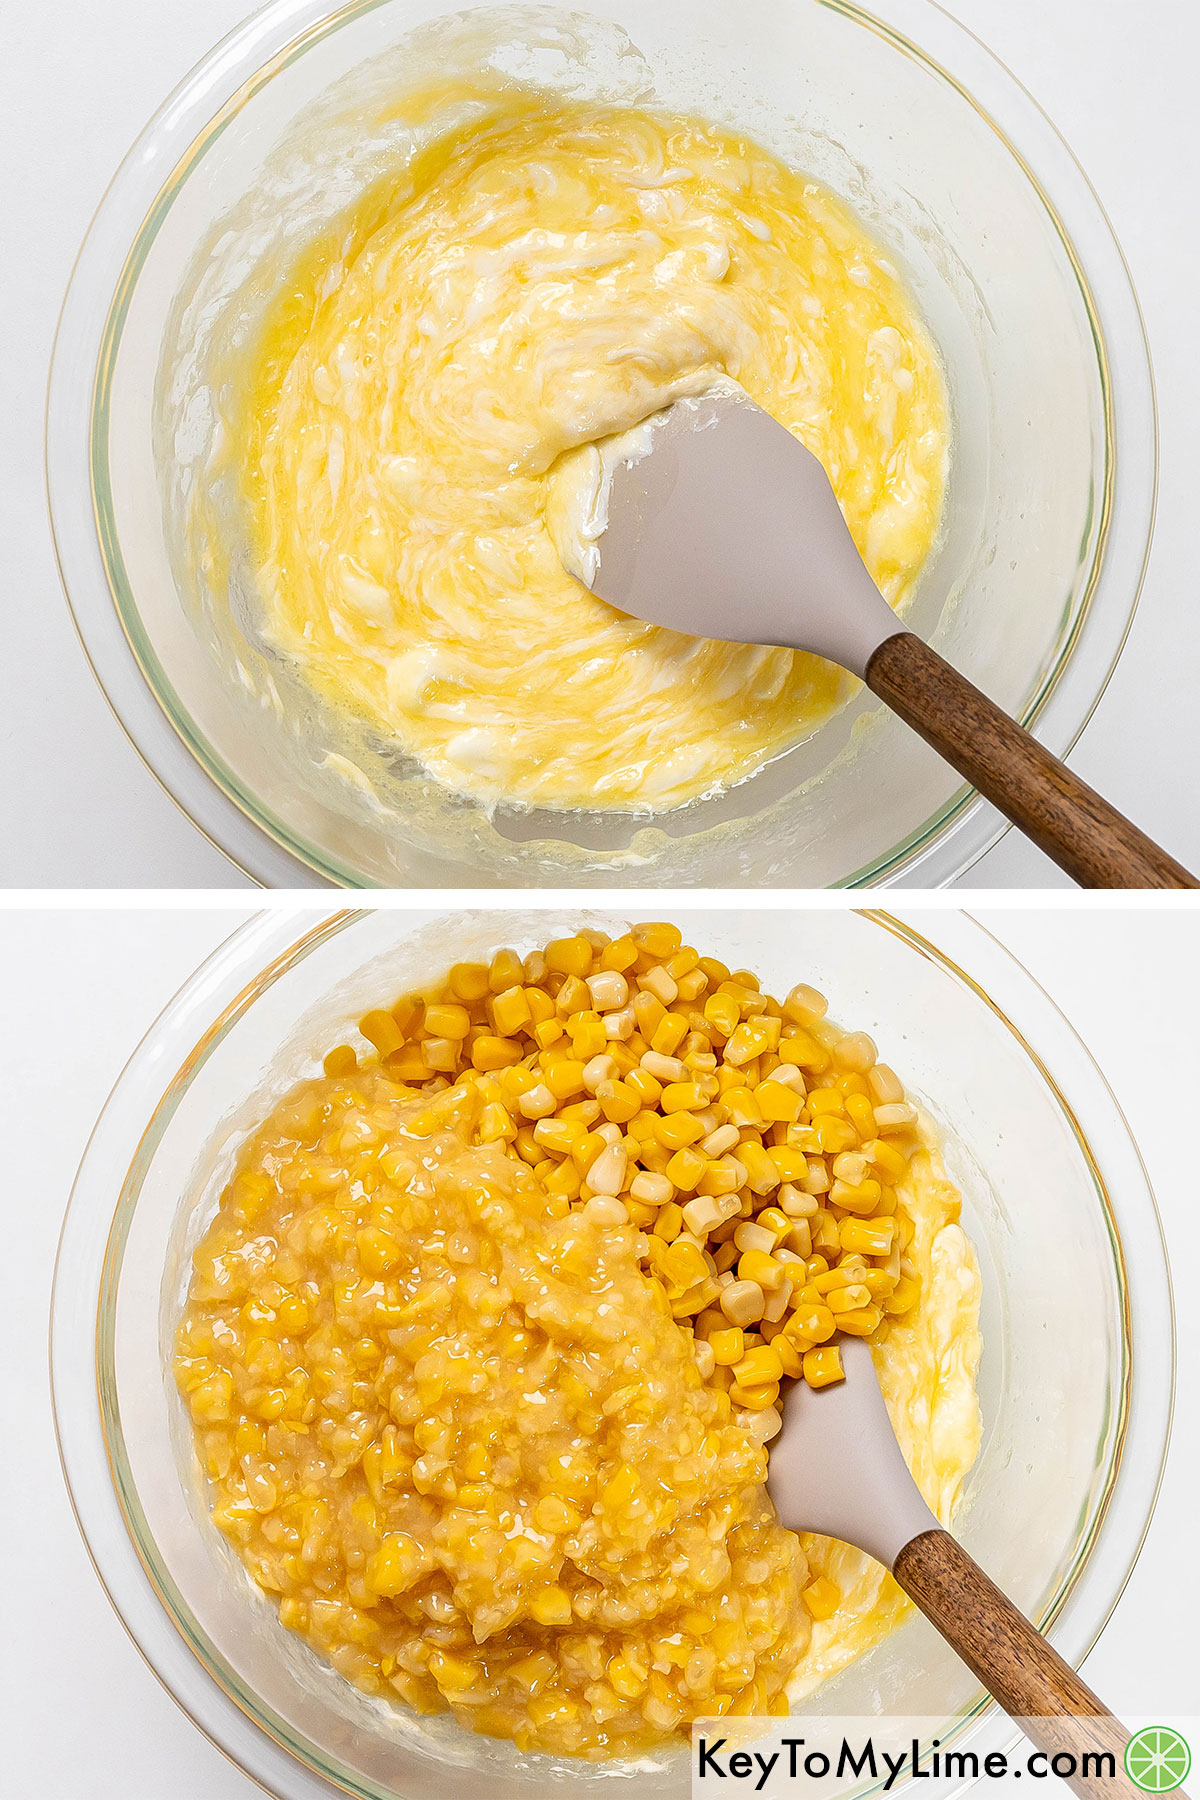 Once the wet ingredients are mixed together adding both types of corn to the mixing bowl.